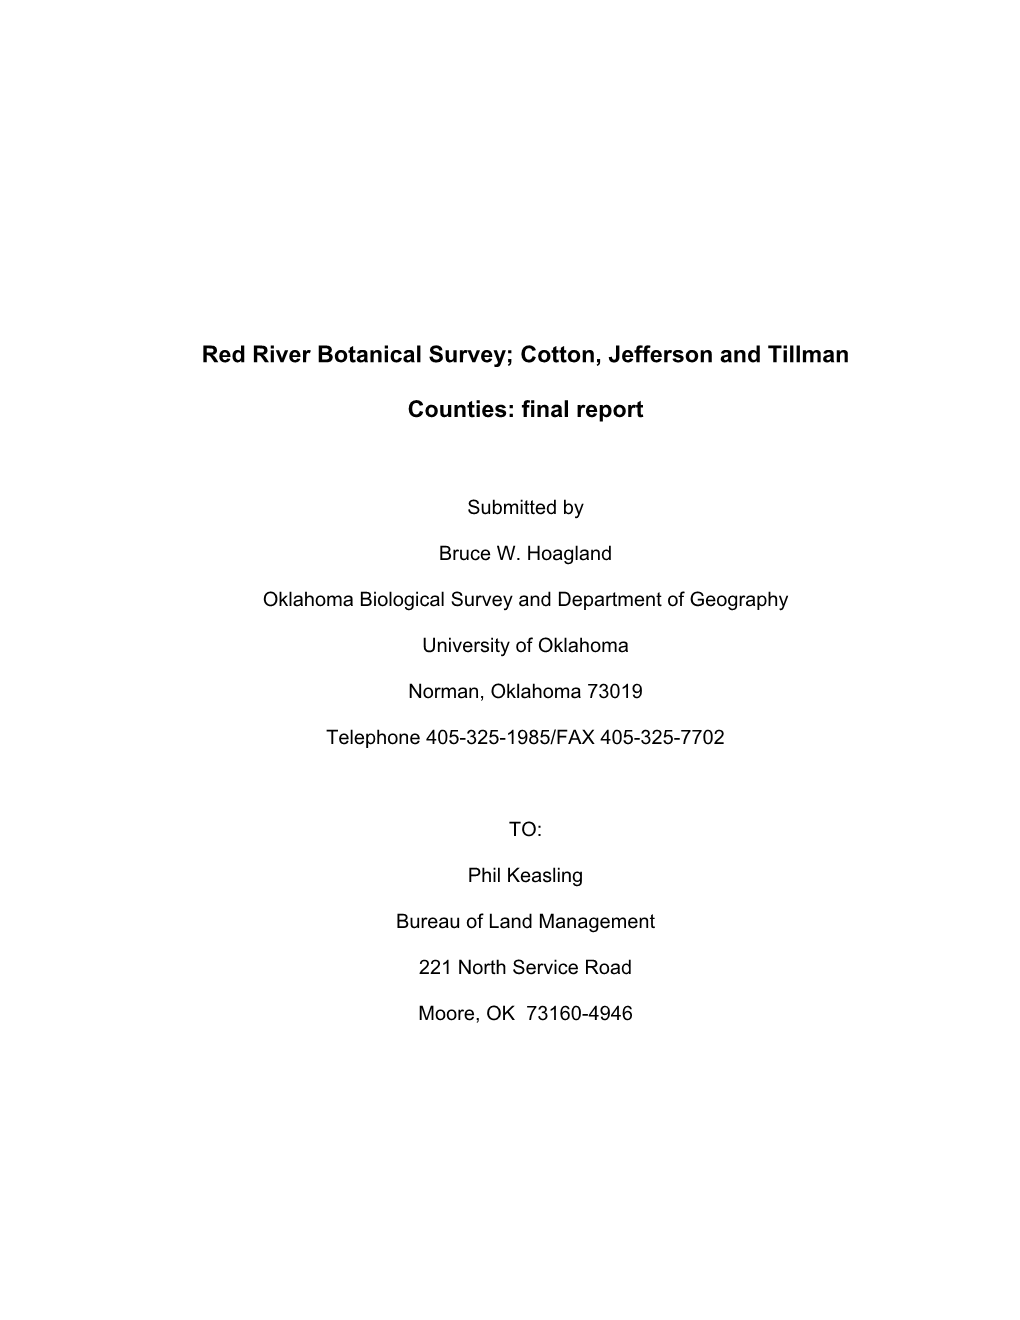 Cotton, Jefferson and Tillman Counties: Final Report